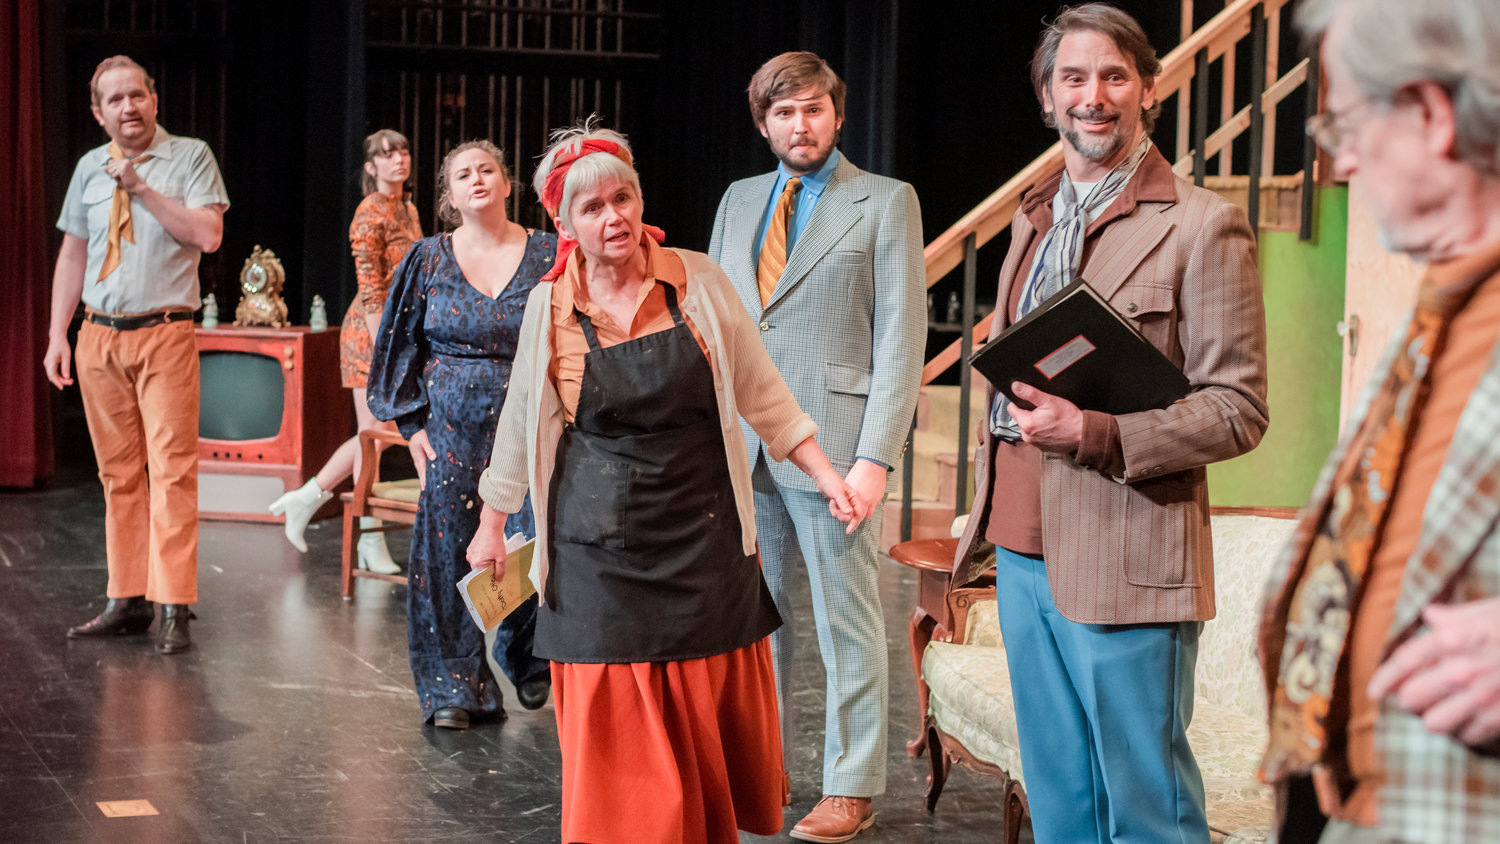 From left, Isaac Wulf as Freddie Fellowes, Isabel Nixon Klein as Brooke Ashton, Jennifer Cole as Belinda Blair, Yvonne Christina as Dotty Otley, Judah MacNeely as Gary Lejune, Seth MacNeely as Lloyd Dallas, and D Douglas Lukascik perform on stage during dress rehearsals for the “Noises Off,” play by Michael Frayn at Centralia College directed by Emmy Kreilkamp.